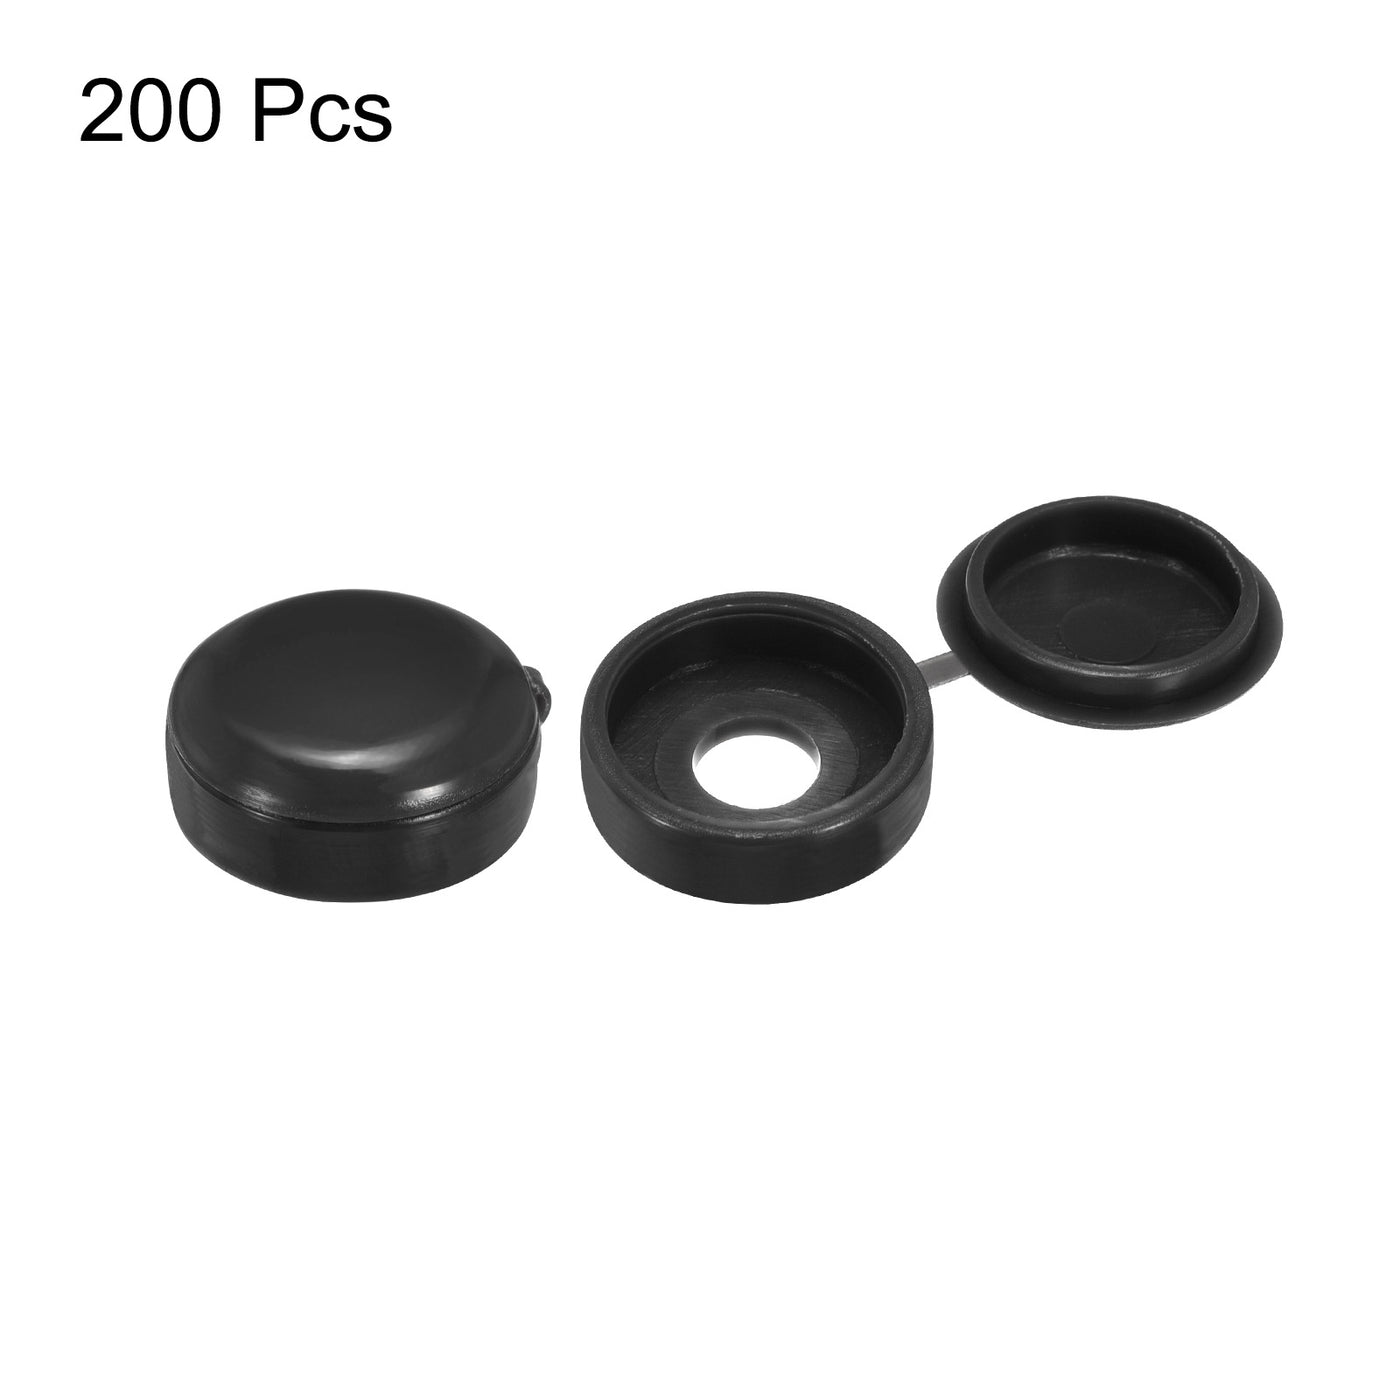 uxcell Uxcell 200Pcs 6mm Hinged Screw Cover Caps Plastic Fold Screw Snap Covers, Black